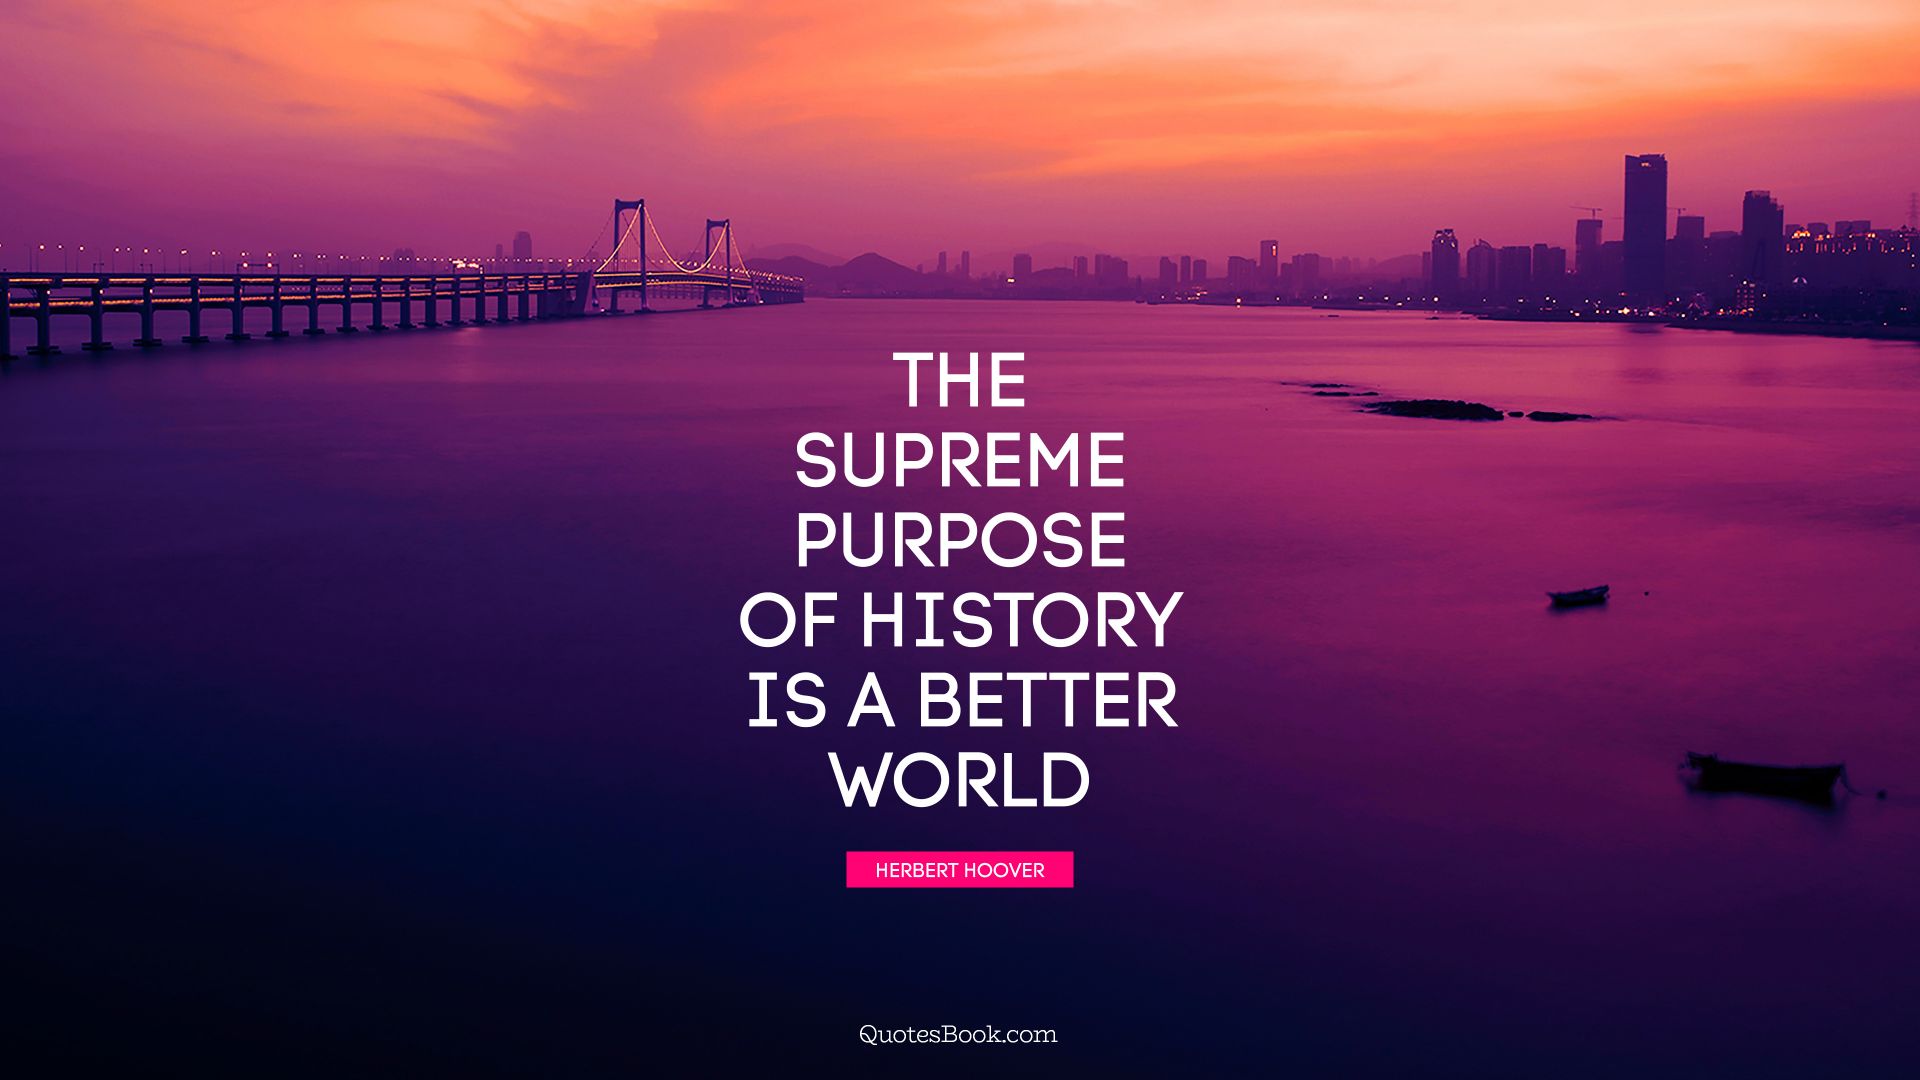 The supreme purpose of history is a better world. - Quote by Herbert Hoover